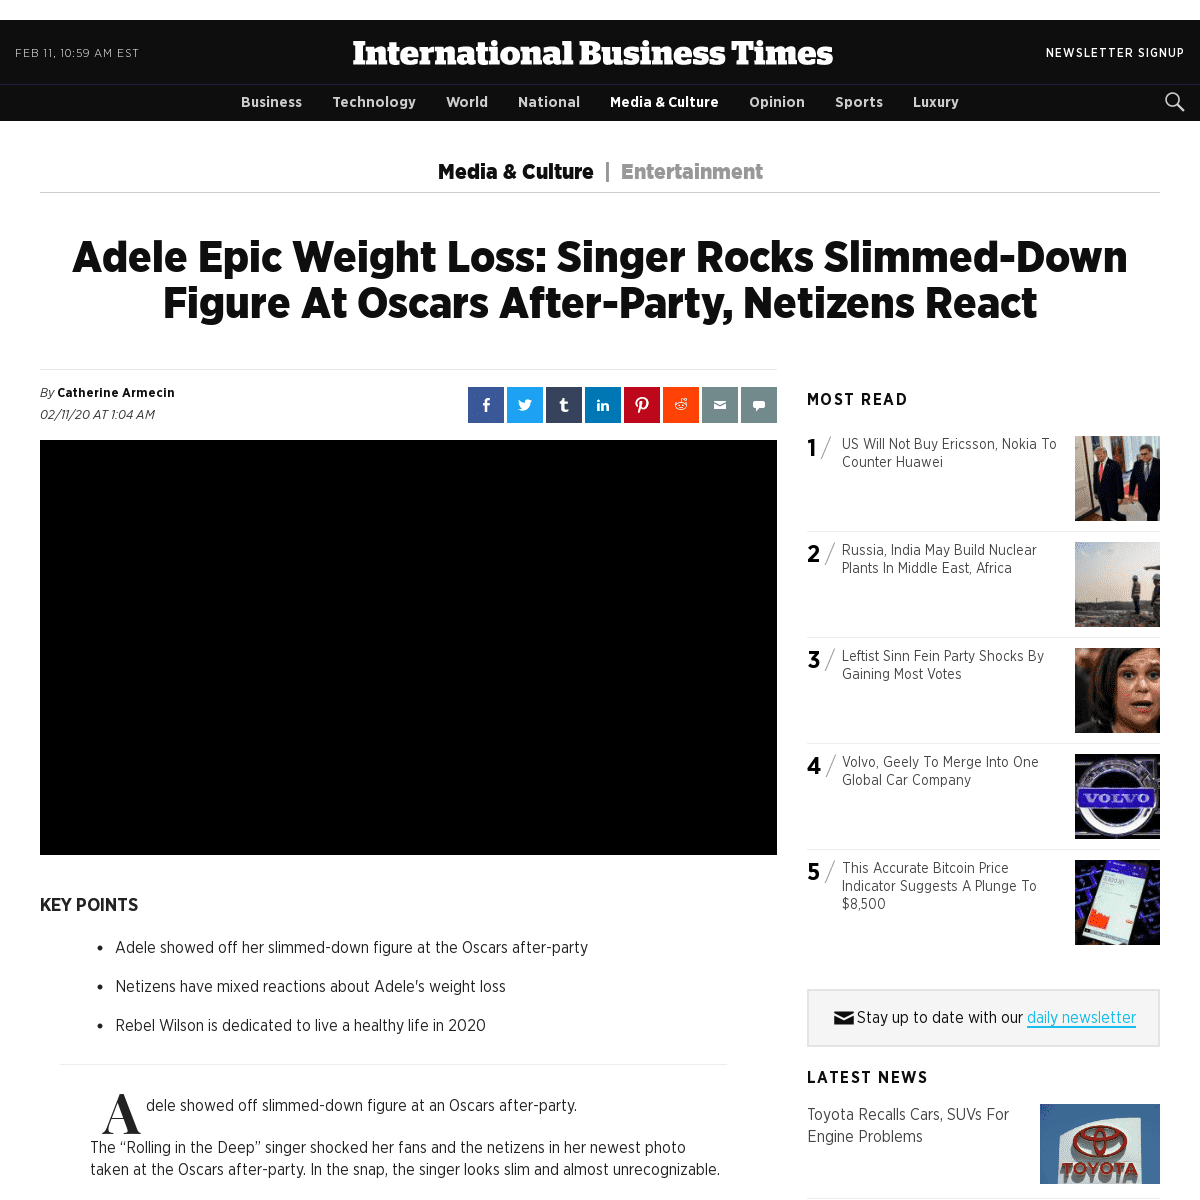 A complete backup of www.ibtimes.com/adele-epic-weight-loss-singer-rocks-slimmed-down-figure-oscars-after-party-netizens-2919742